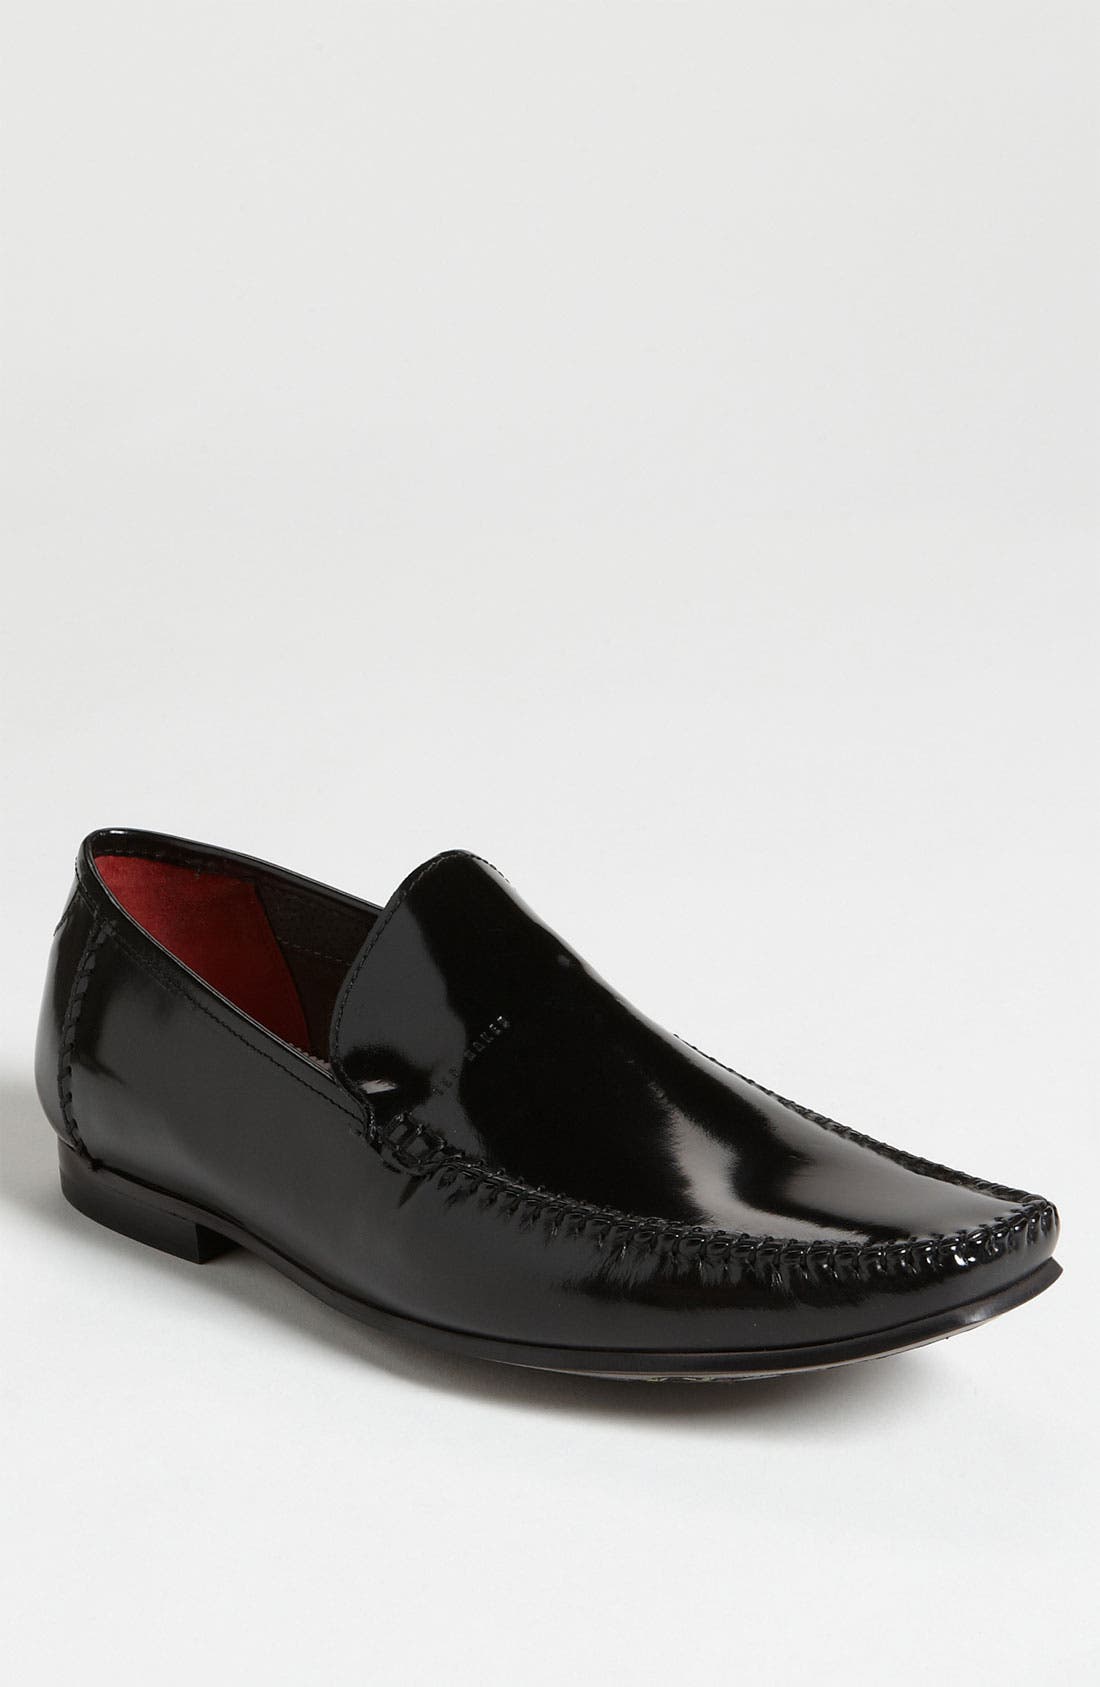 ted baker bly leather loafers